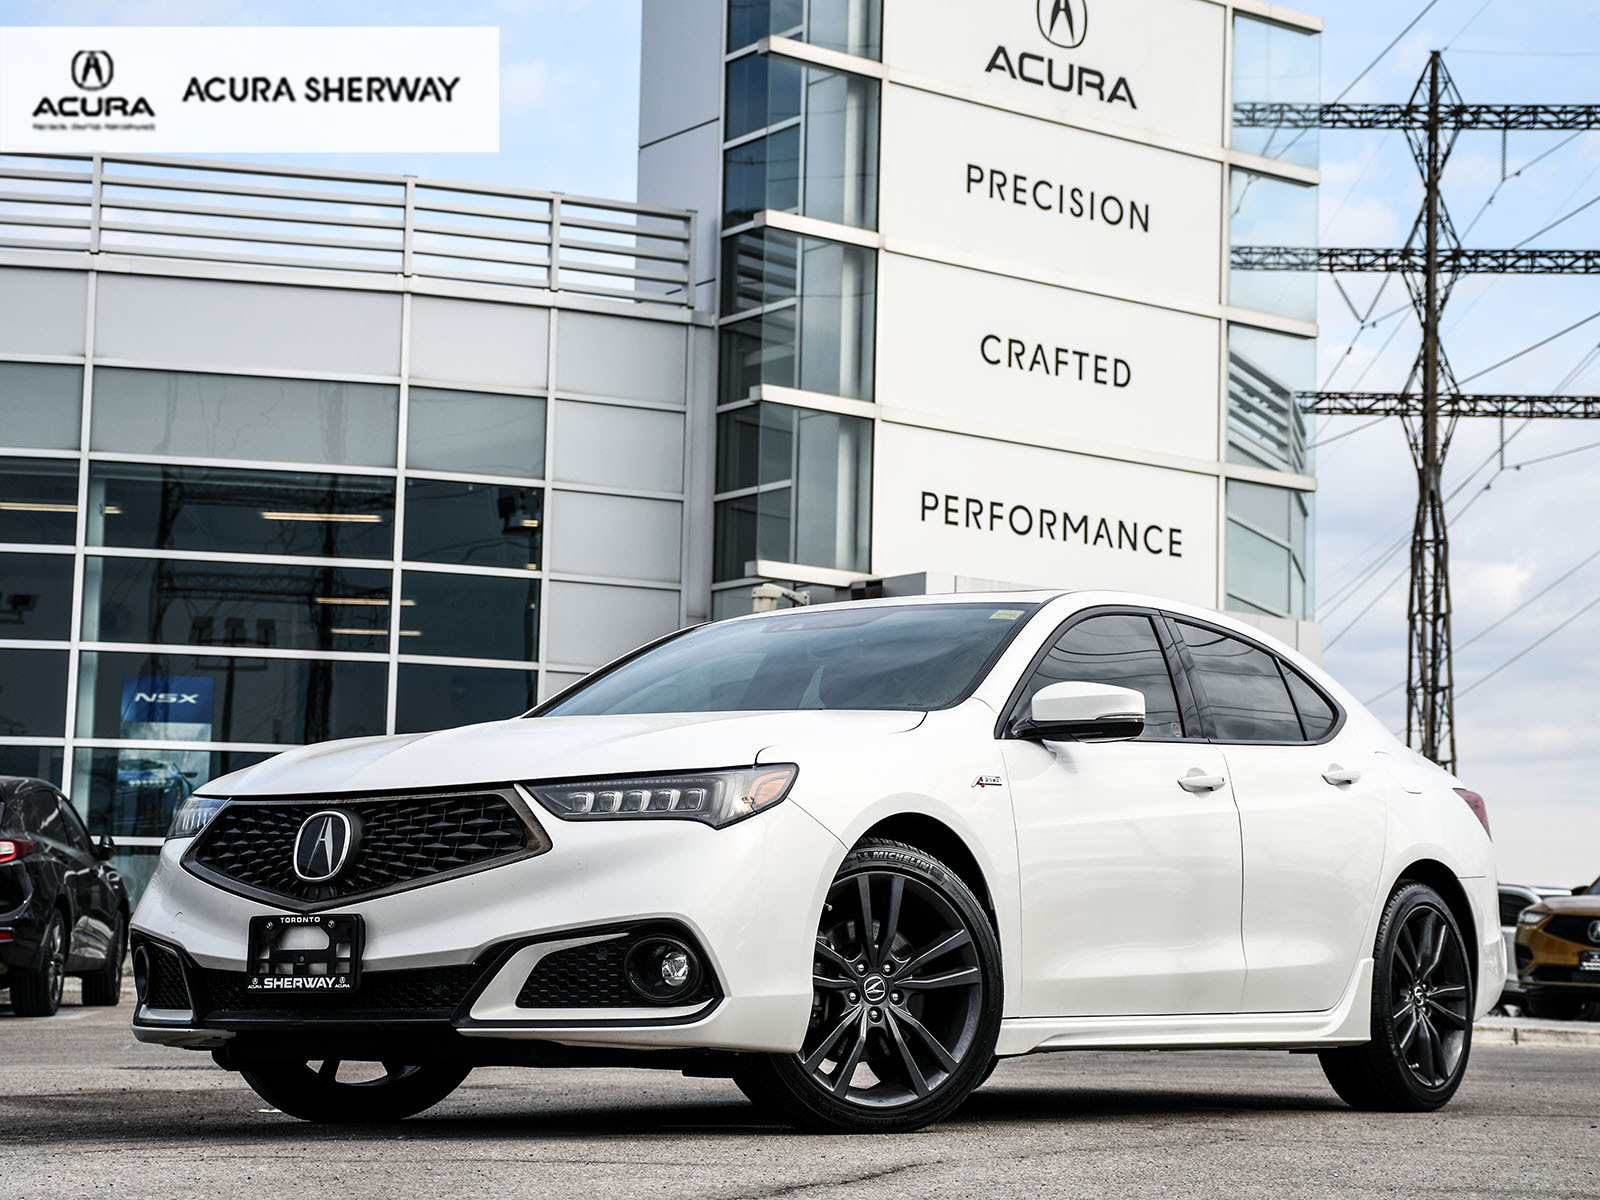 2020 Acura TLX TECH A-SPEC SH-AWD - ACURA CERTIFIED